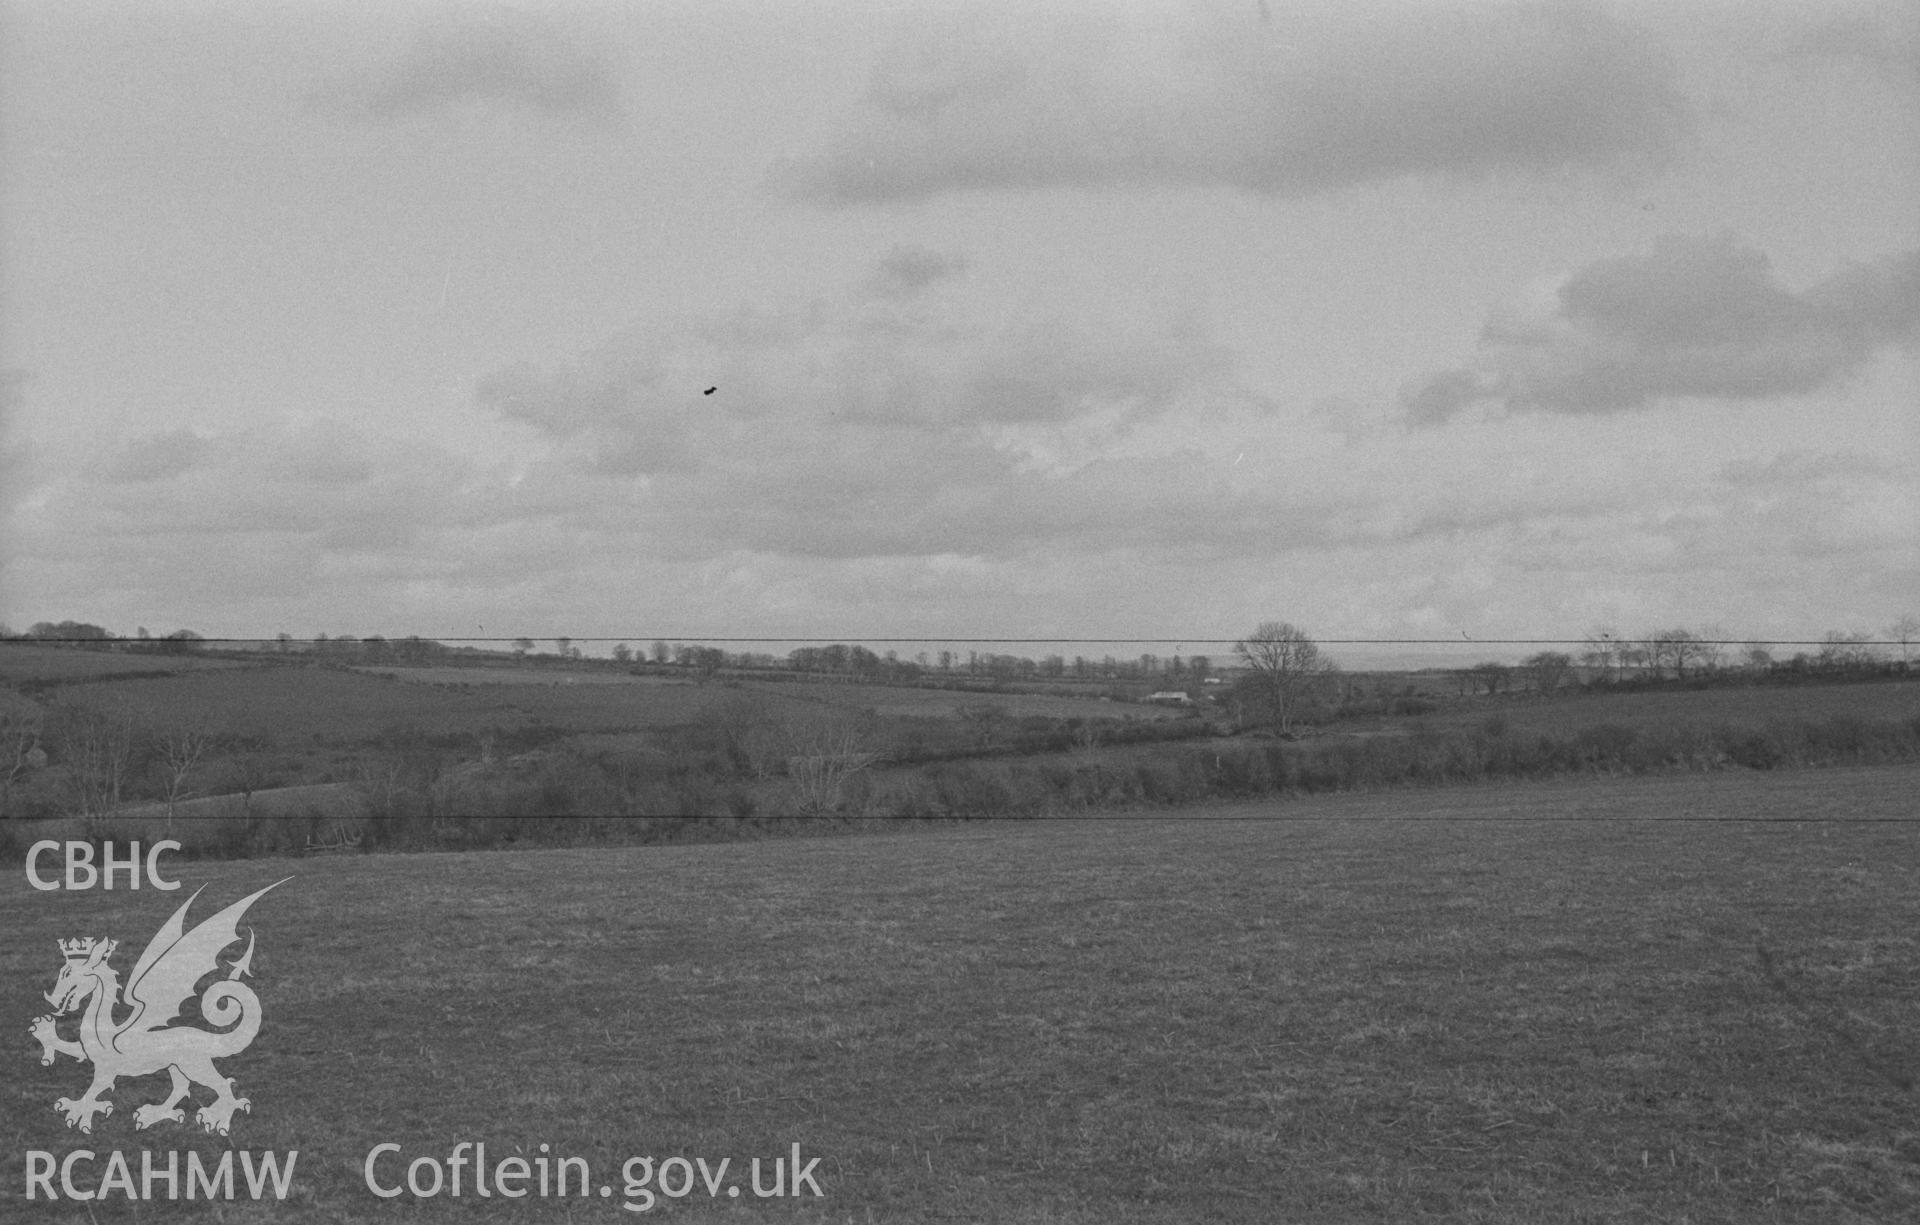 Digital copy of a black and white negative showing site of St Mary's church, Llanfair Trefhelygen. Photographed in April 1963 by Arthur O. Chater from Grid Reference SN 3412 4412, looking east.